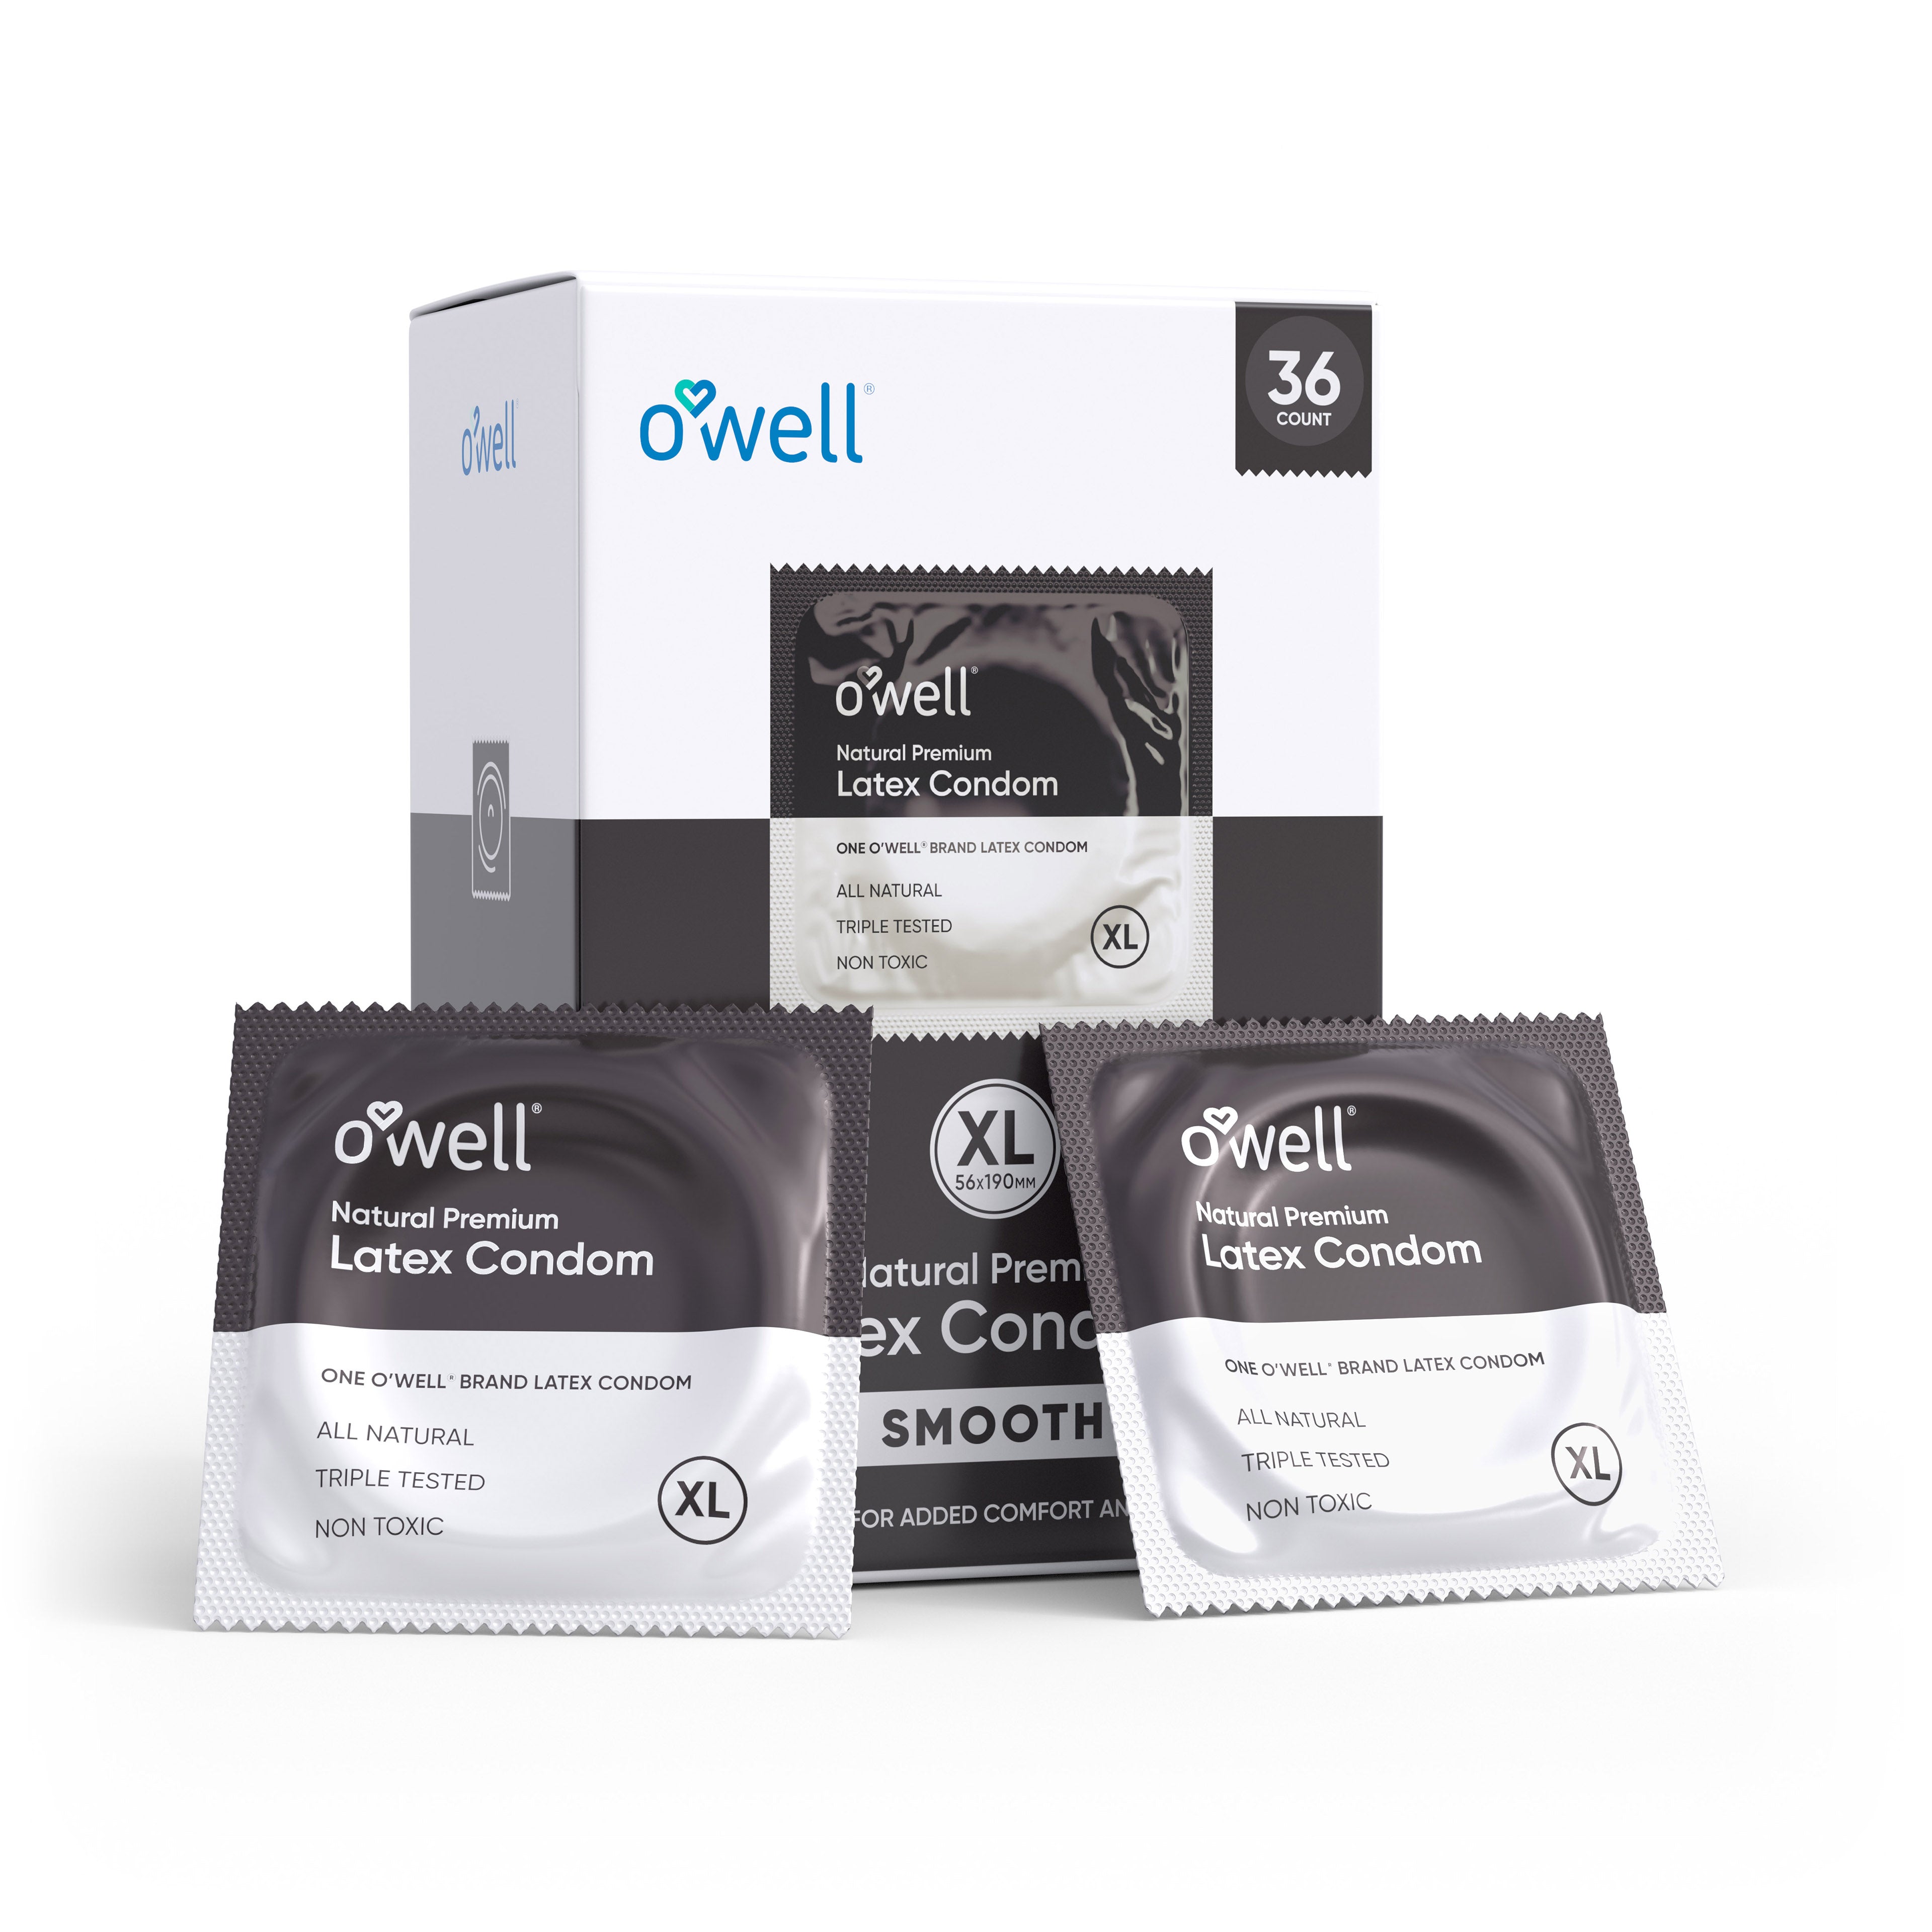 O’WELL Premium All-Natural Latex Condoms, 36 Count (Smooth)